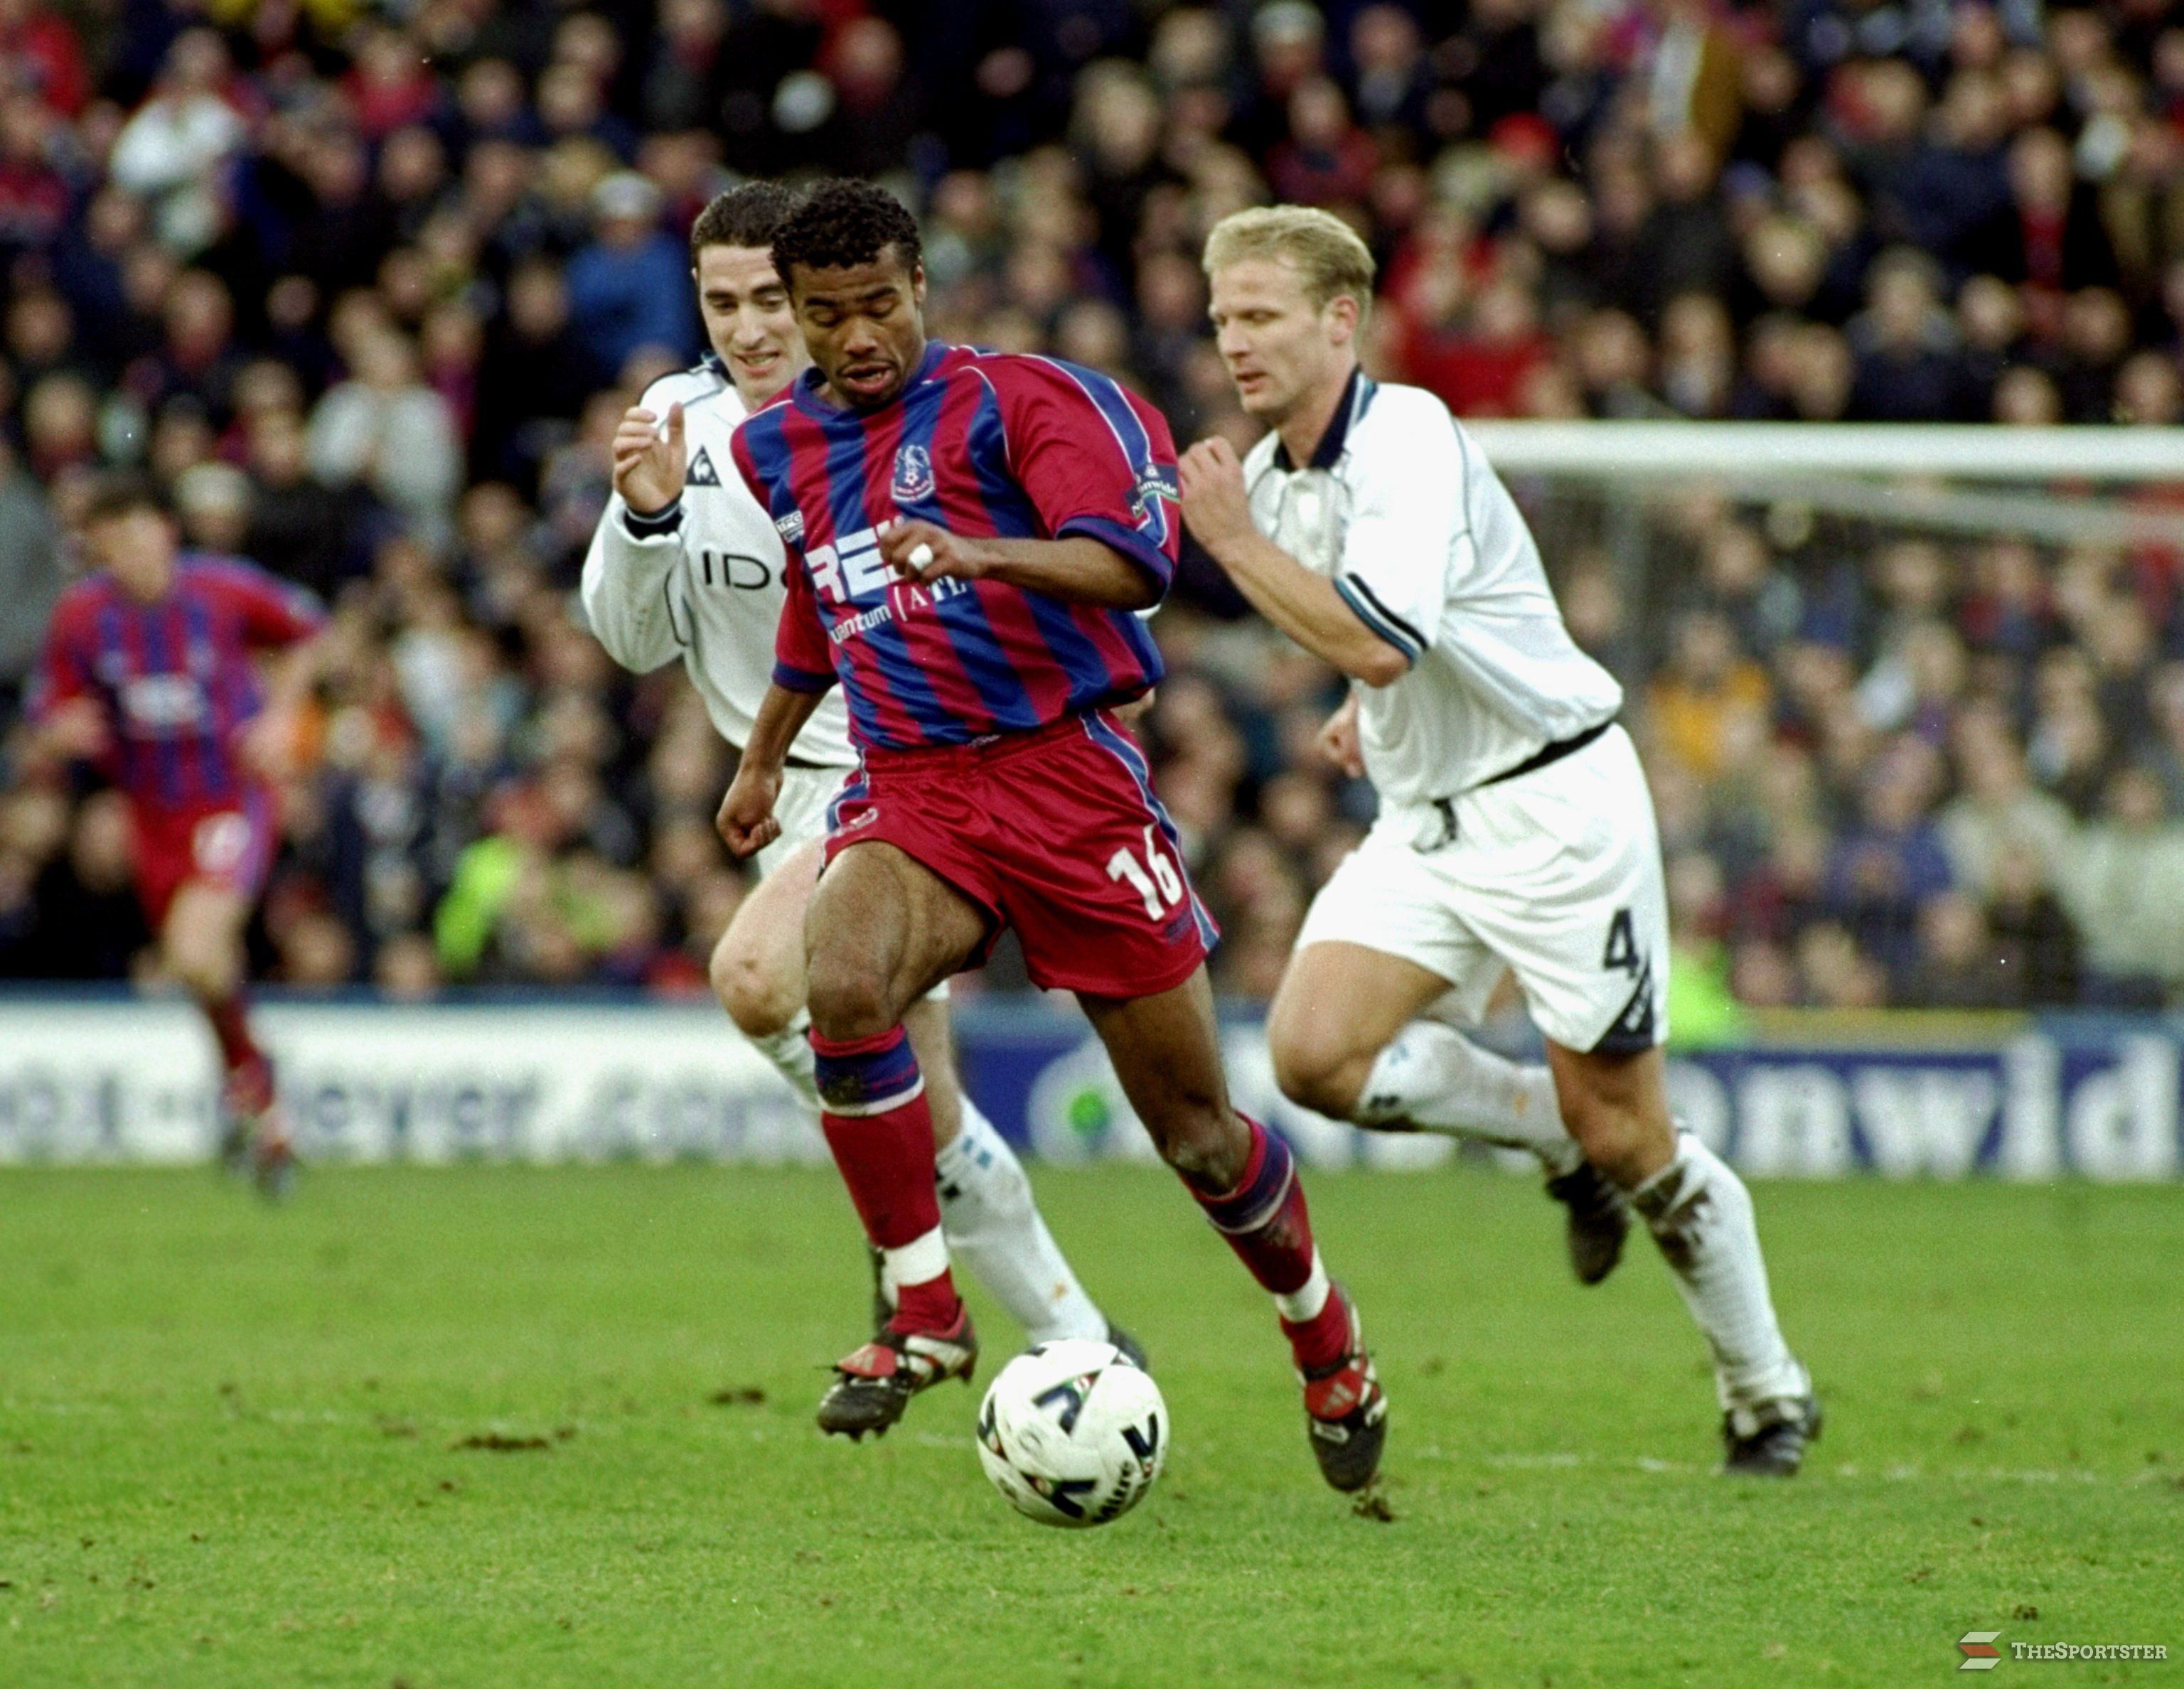 4 Mar 2000: Ashley Cole of Crystal Palace in action against Manchester City during the Nationwide League Division One match at Selhurst Park in London. The game ended 1-1. \ Mandatory Credit: Craig Prentis /Allsport